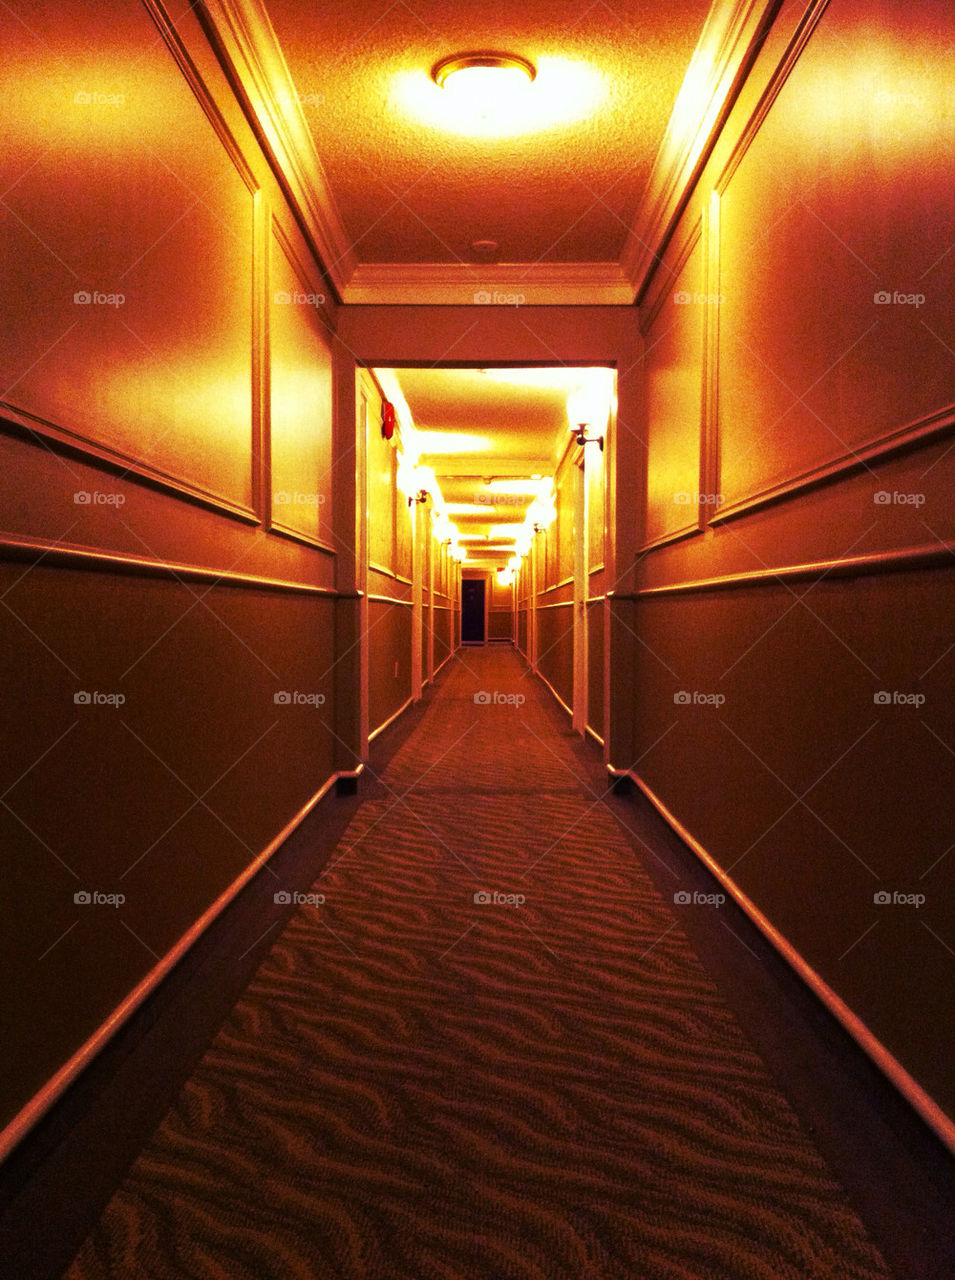 hotel perspective creepy hallway by kzr